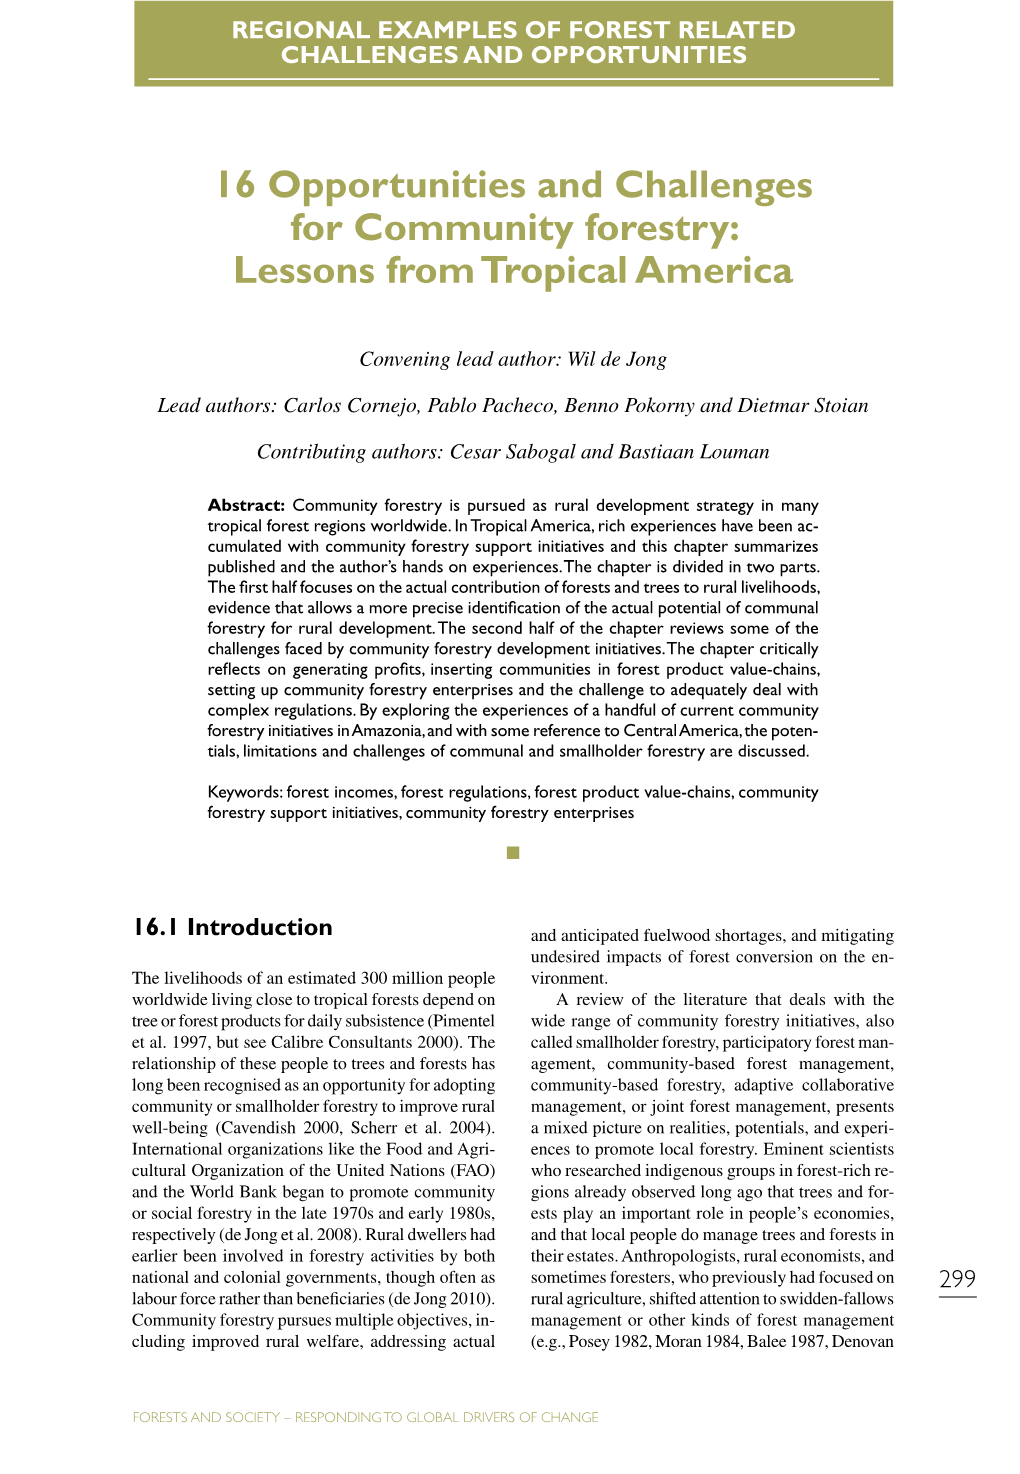 16 Opportunities and Challenges for Community Forestry: Lessons from Tropical America